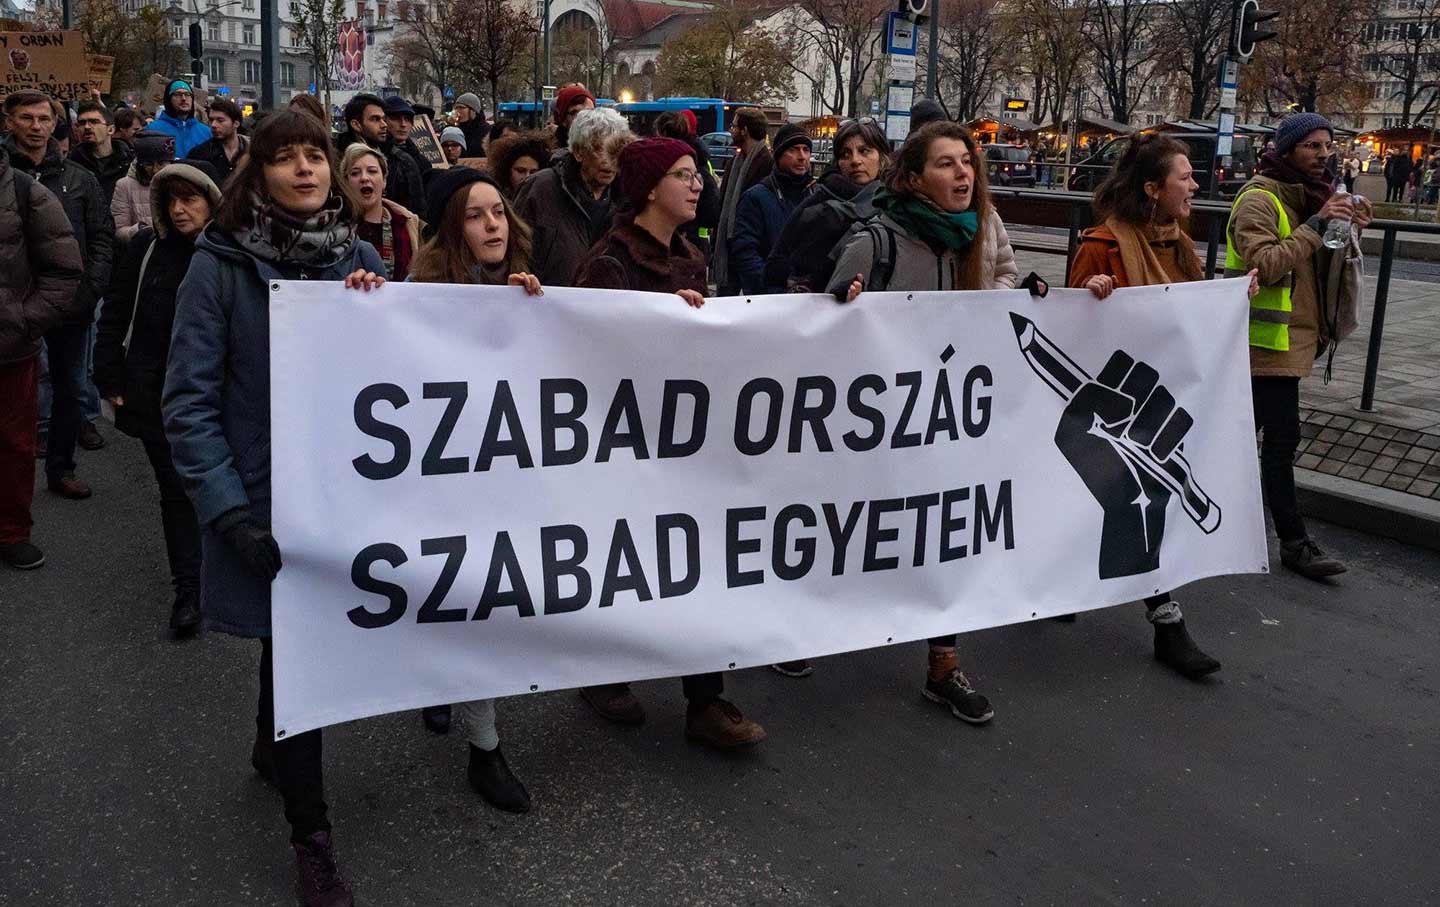 These Hungarian Students Are Fighting for Their Country’s Democracy